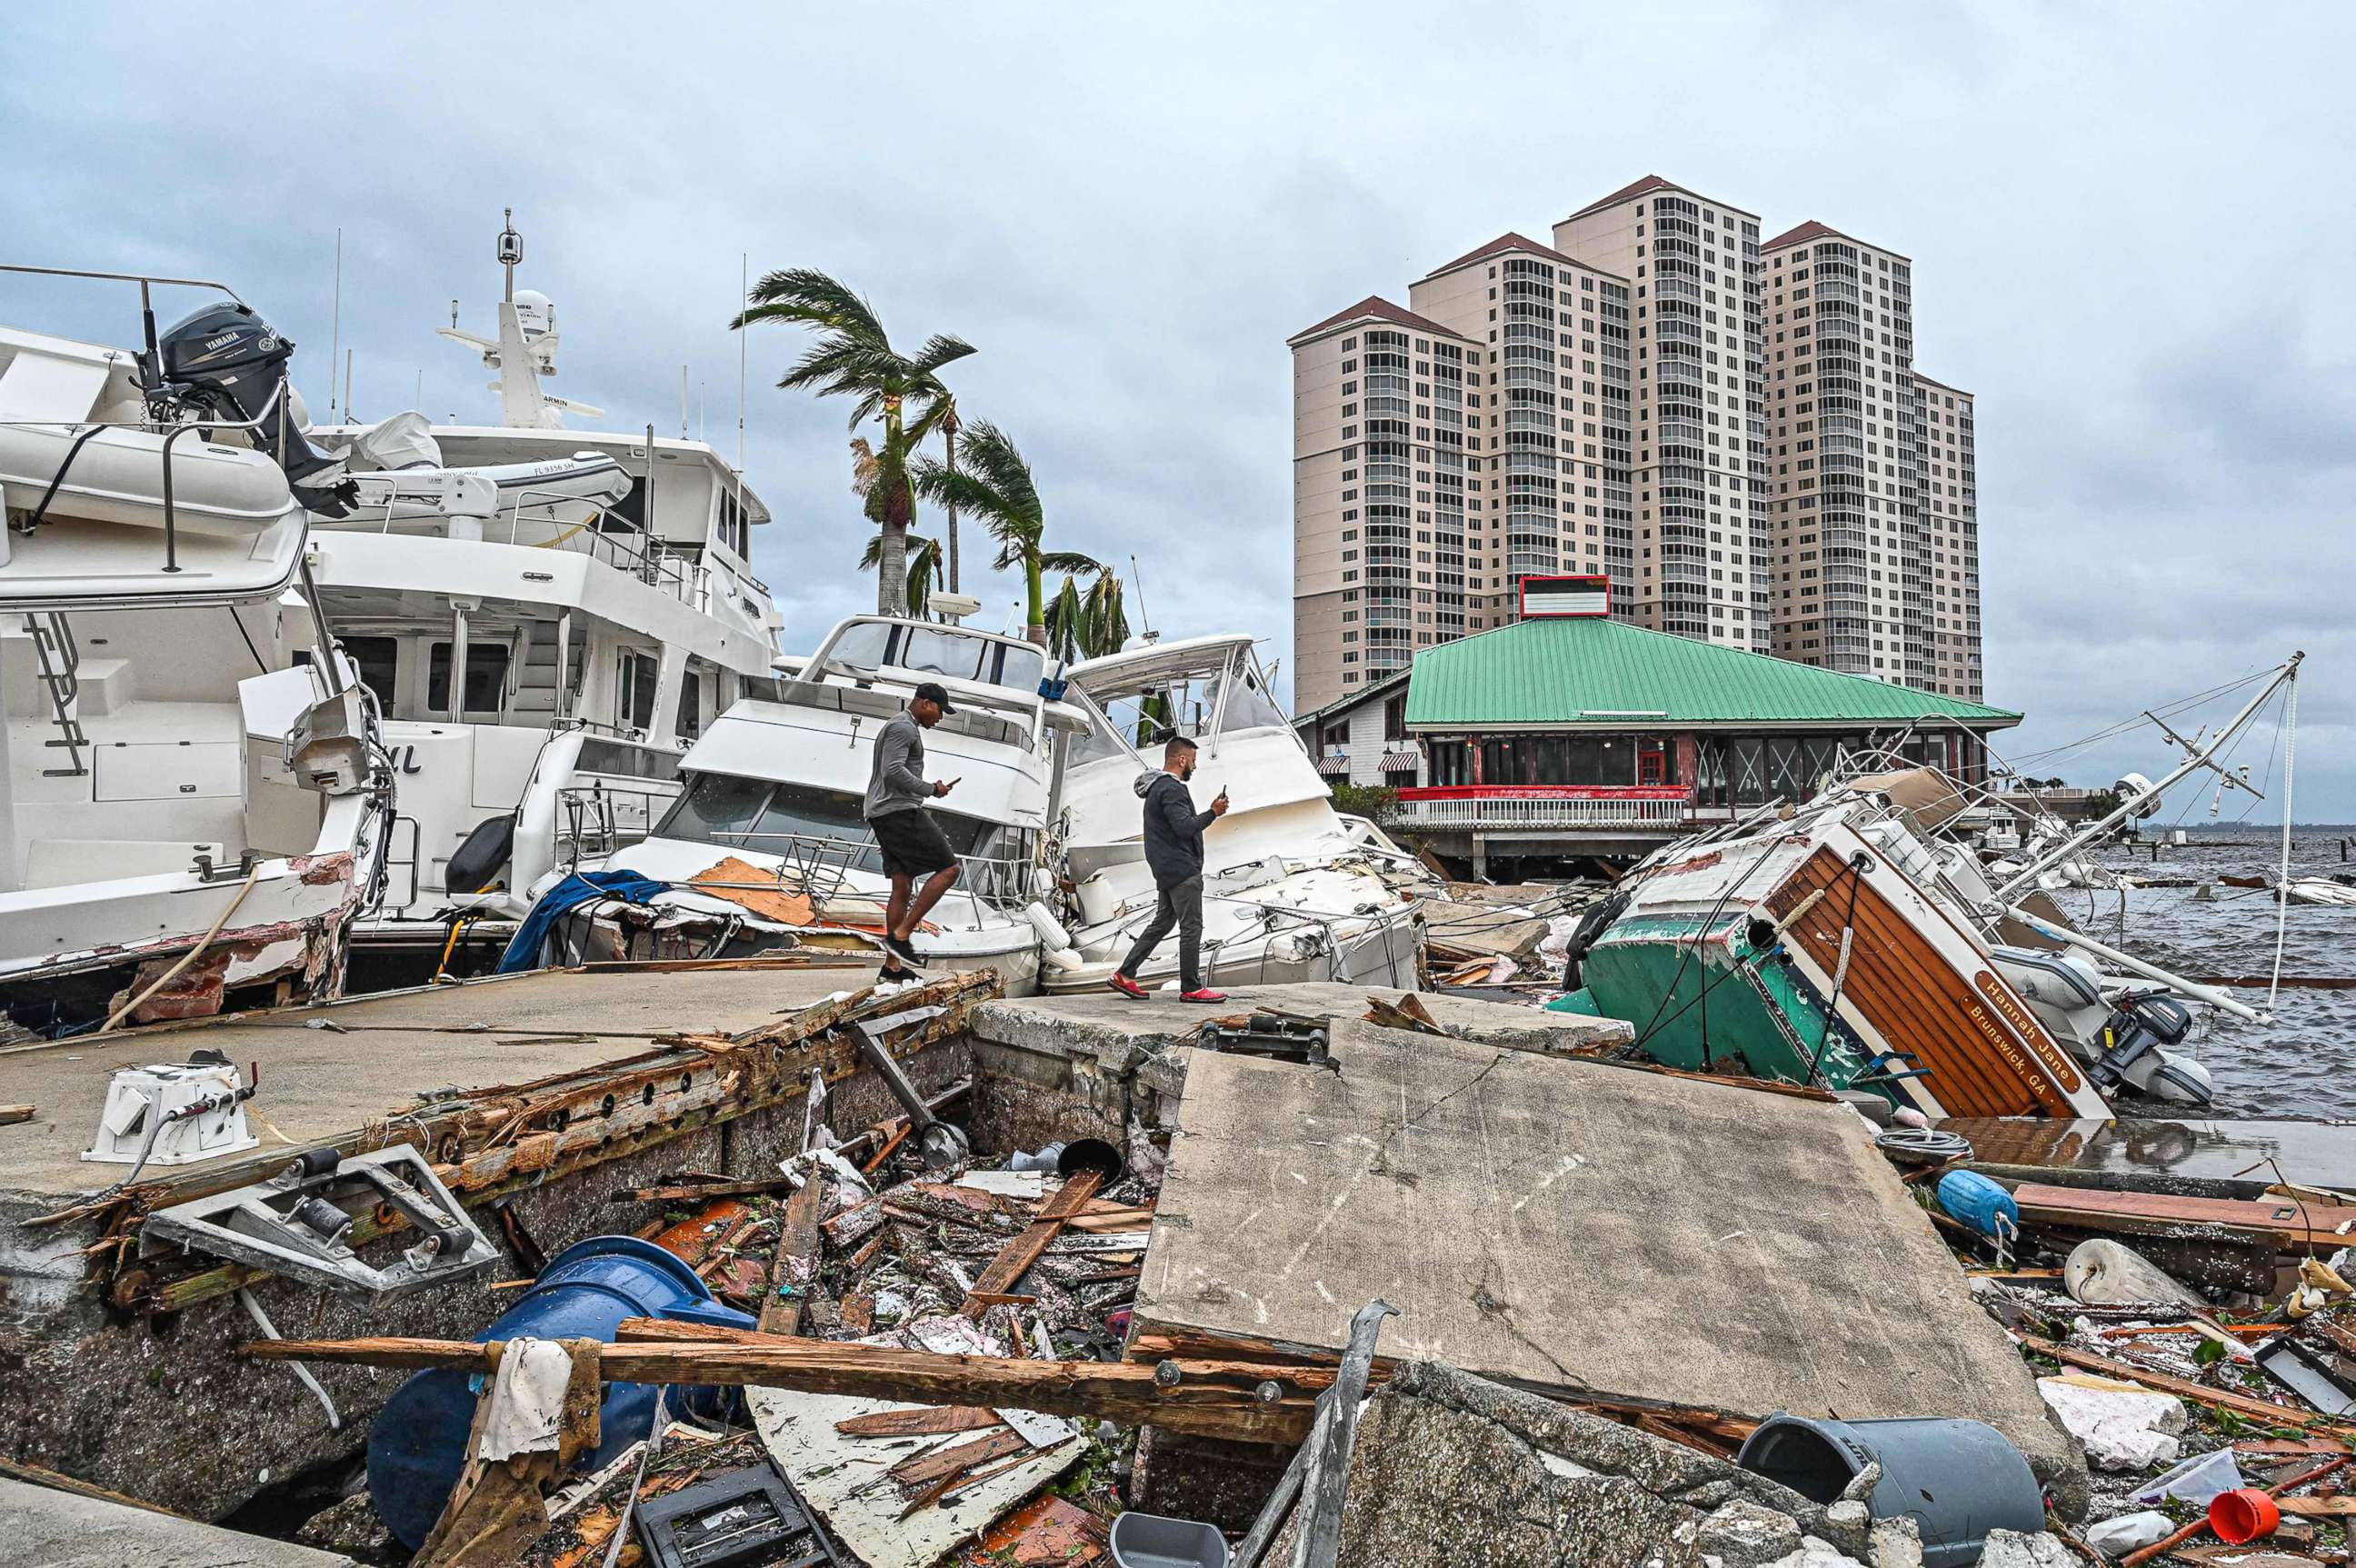 PHOTO: Residents inspect damage to a marina as boats are partially submerged in the aftermath of Hurricane Ian in Fort Myers, Fla., on Sept. 29, 2022.